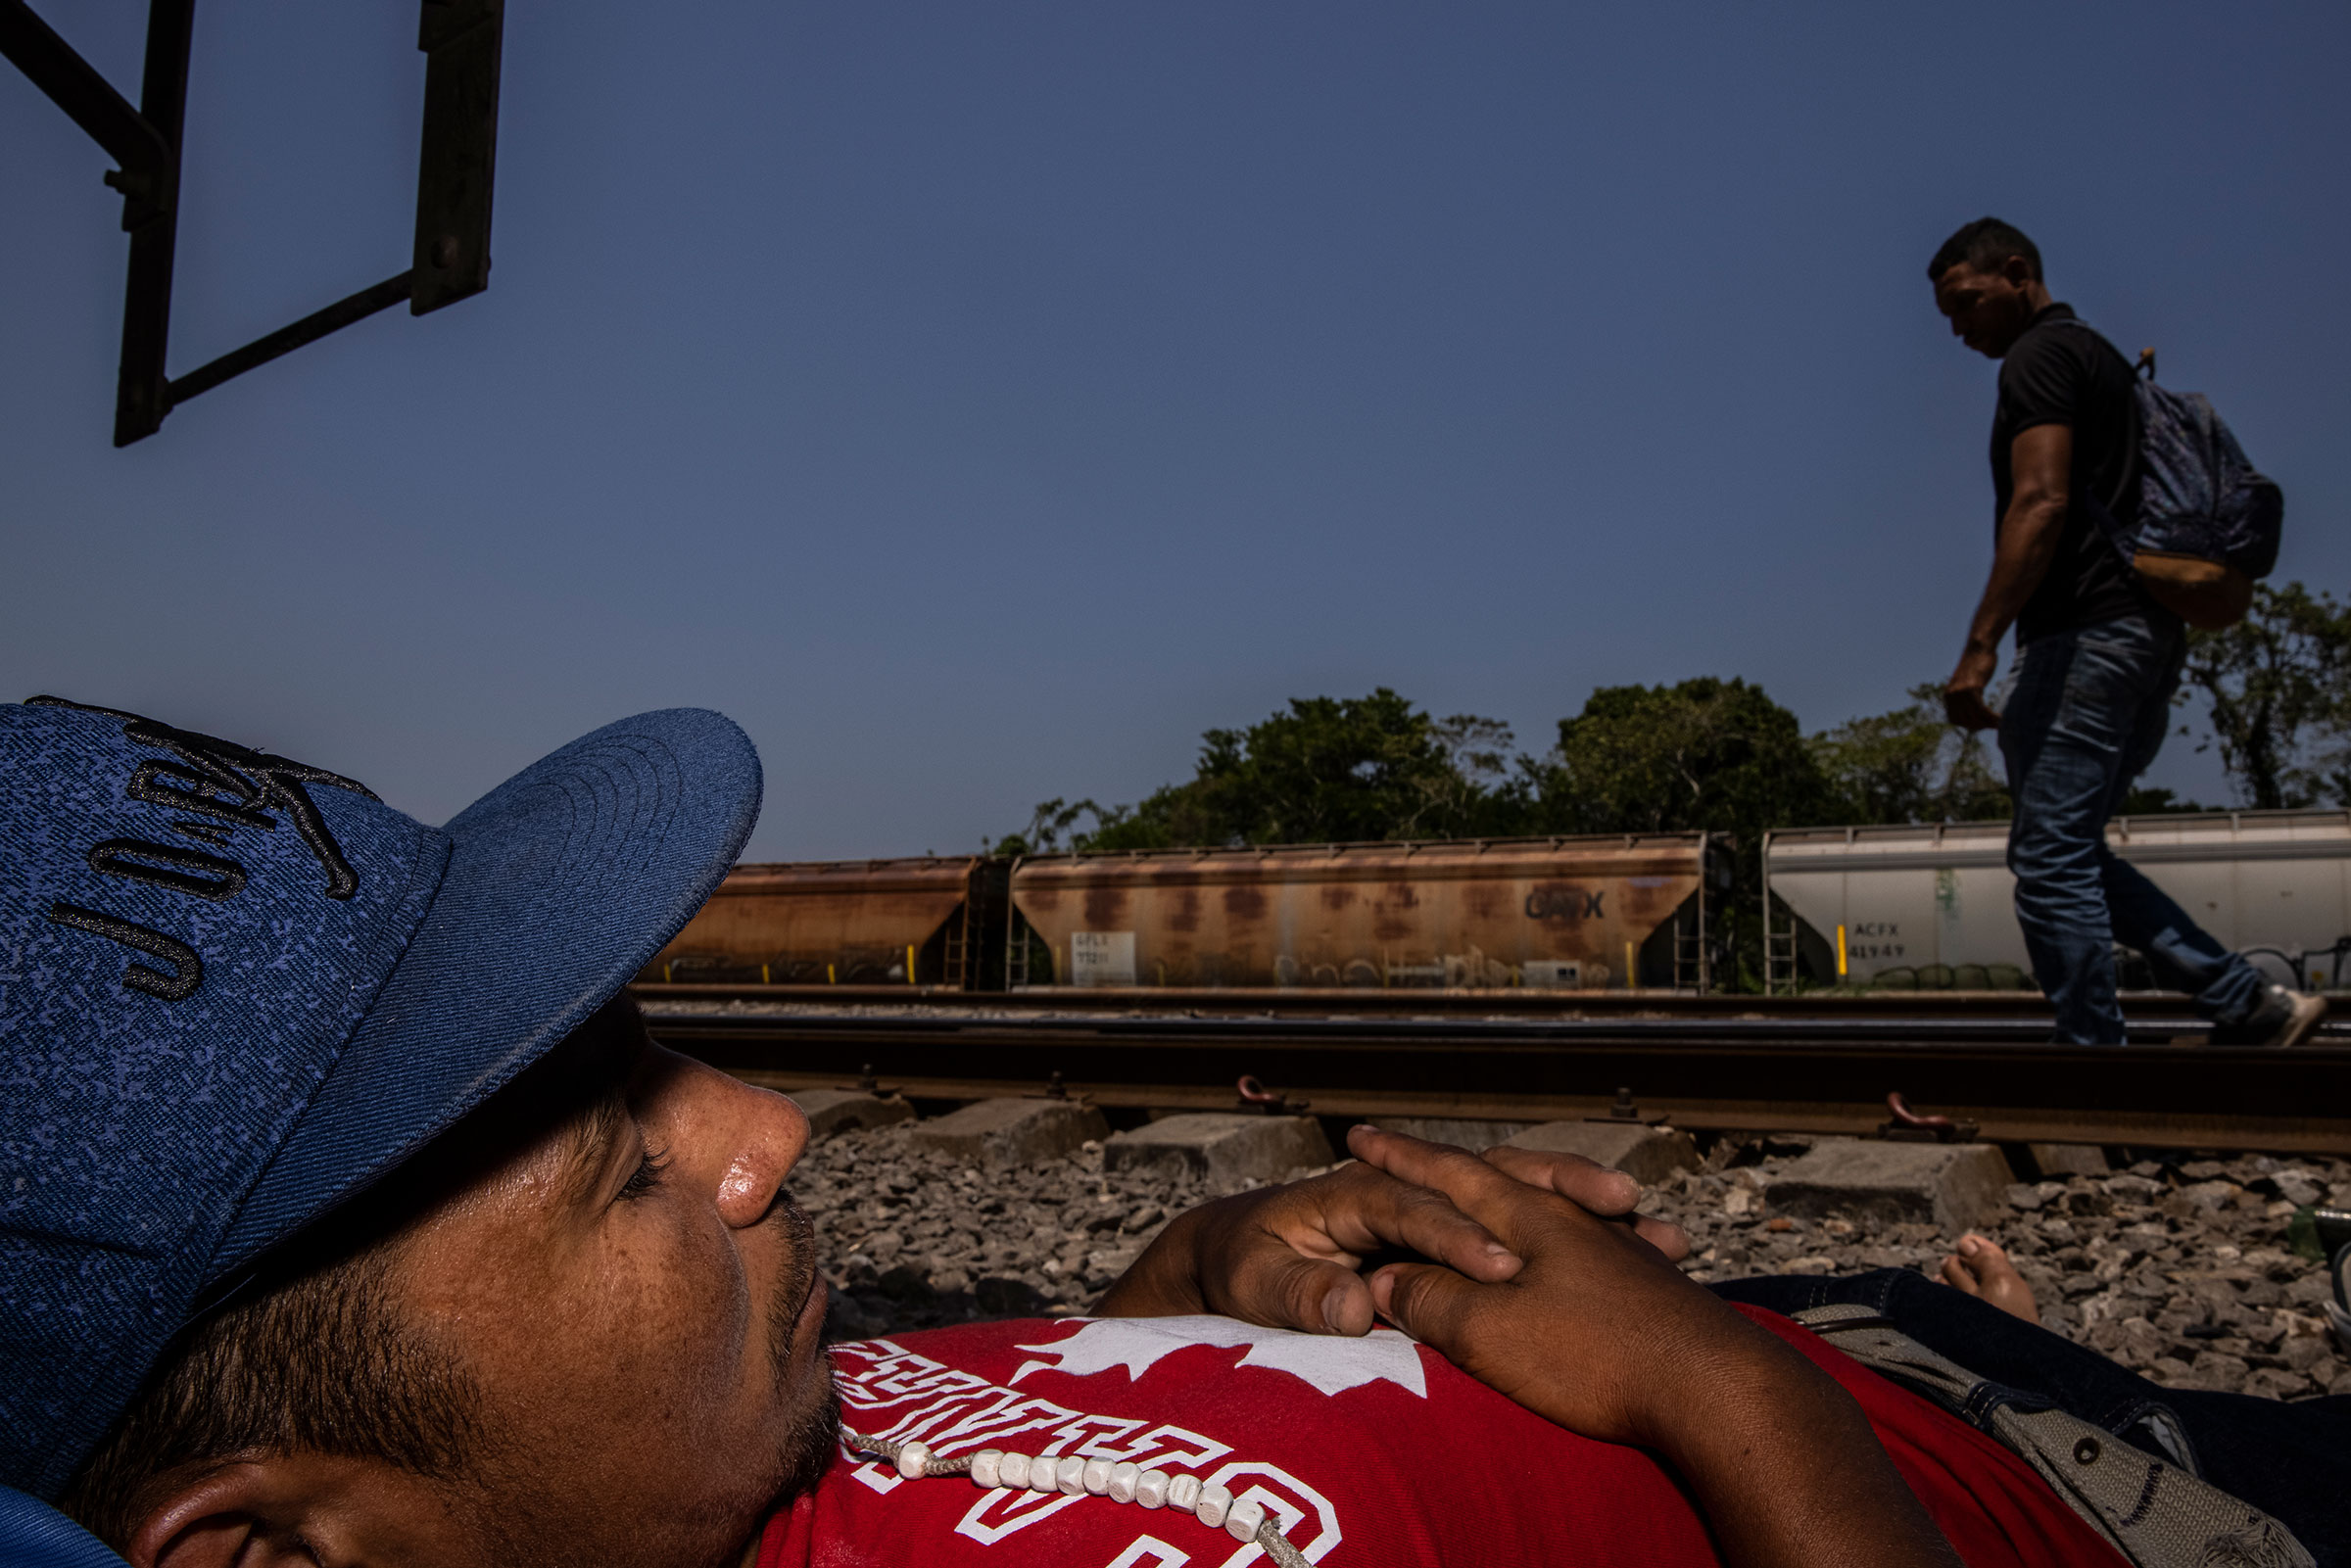 Jesus Antonio Carrillo Mendoza, 28, takes a nap in Higueras in the Mexican state of Veracruz, on March 23, 2021 near cargo trains used by migrants to travel northward through Mexico. He has been traveling for 15 days since leaving his home in Comayagua, Honduras. (Yael Martínez—Magnum Photos for TIME)